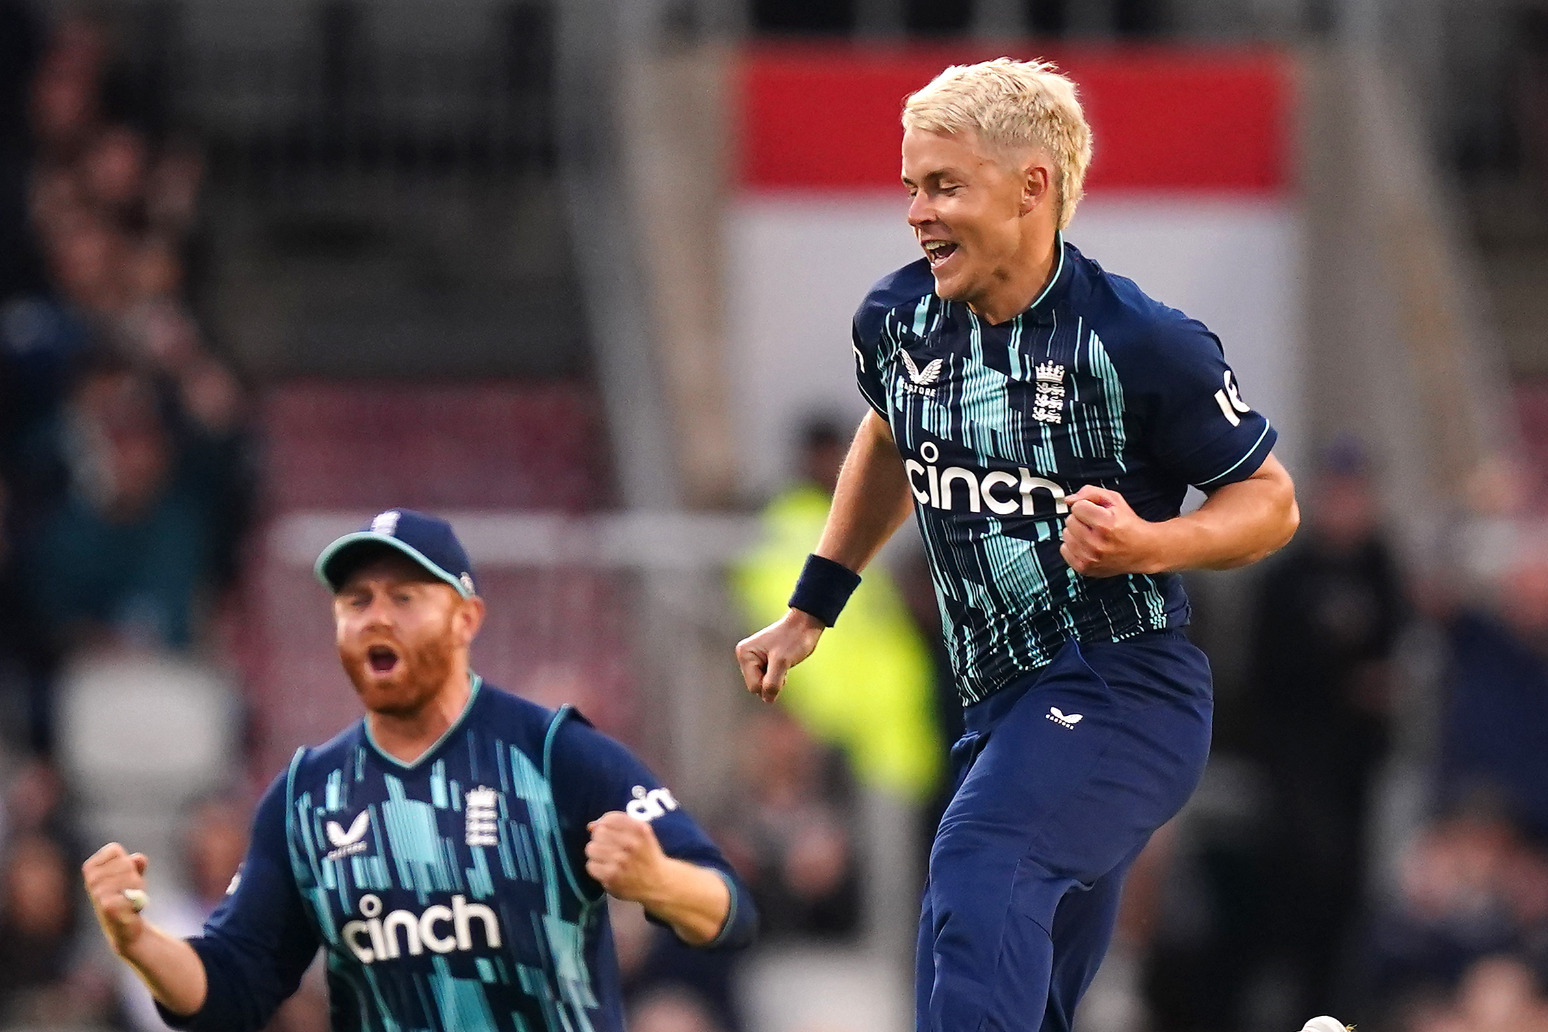 Left-armers blow away South Africa as England square ODI series 